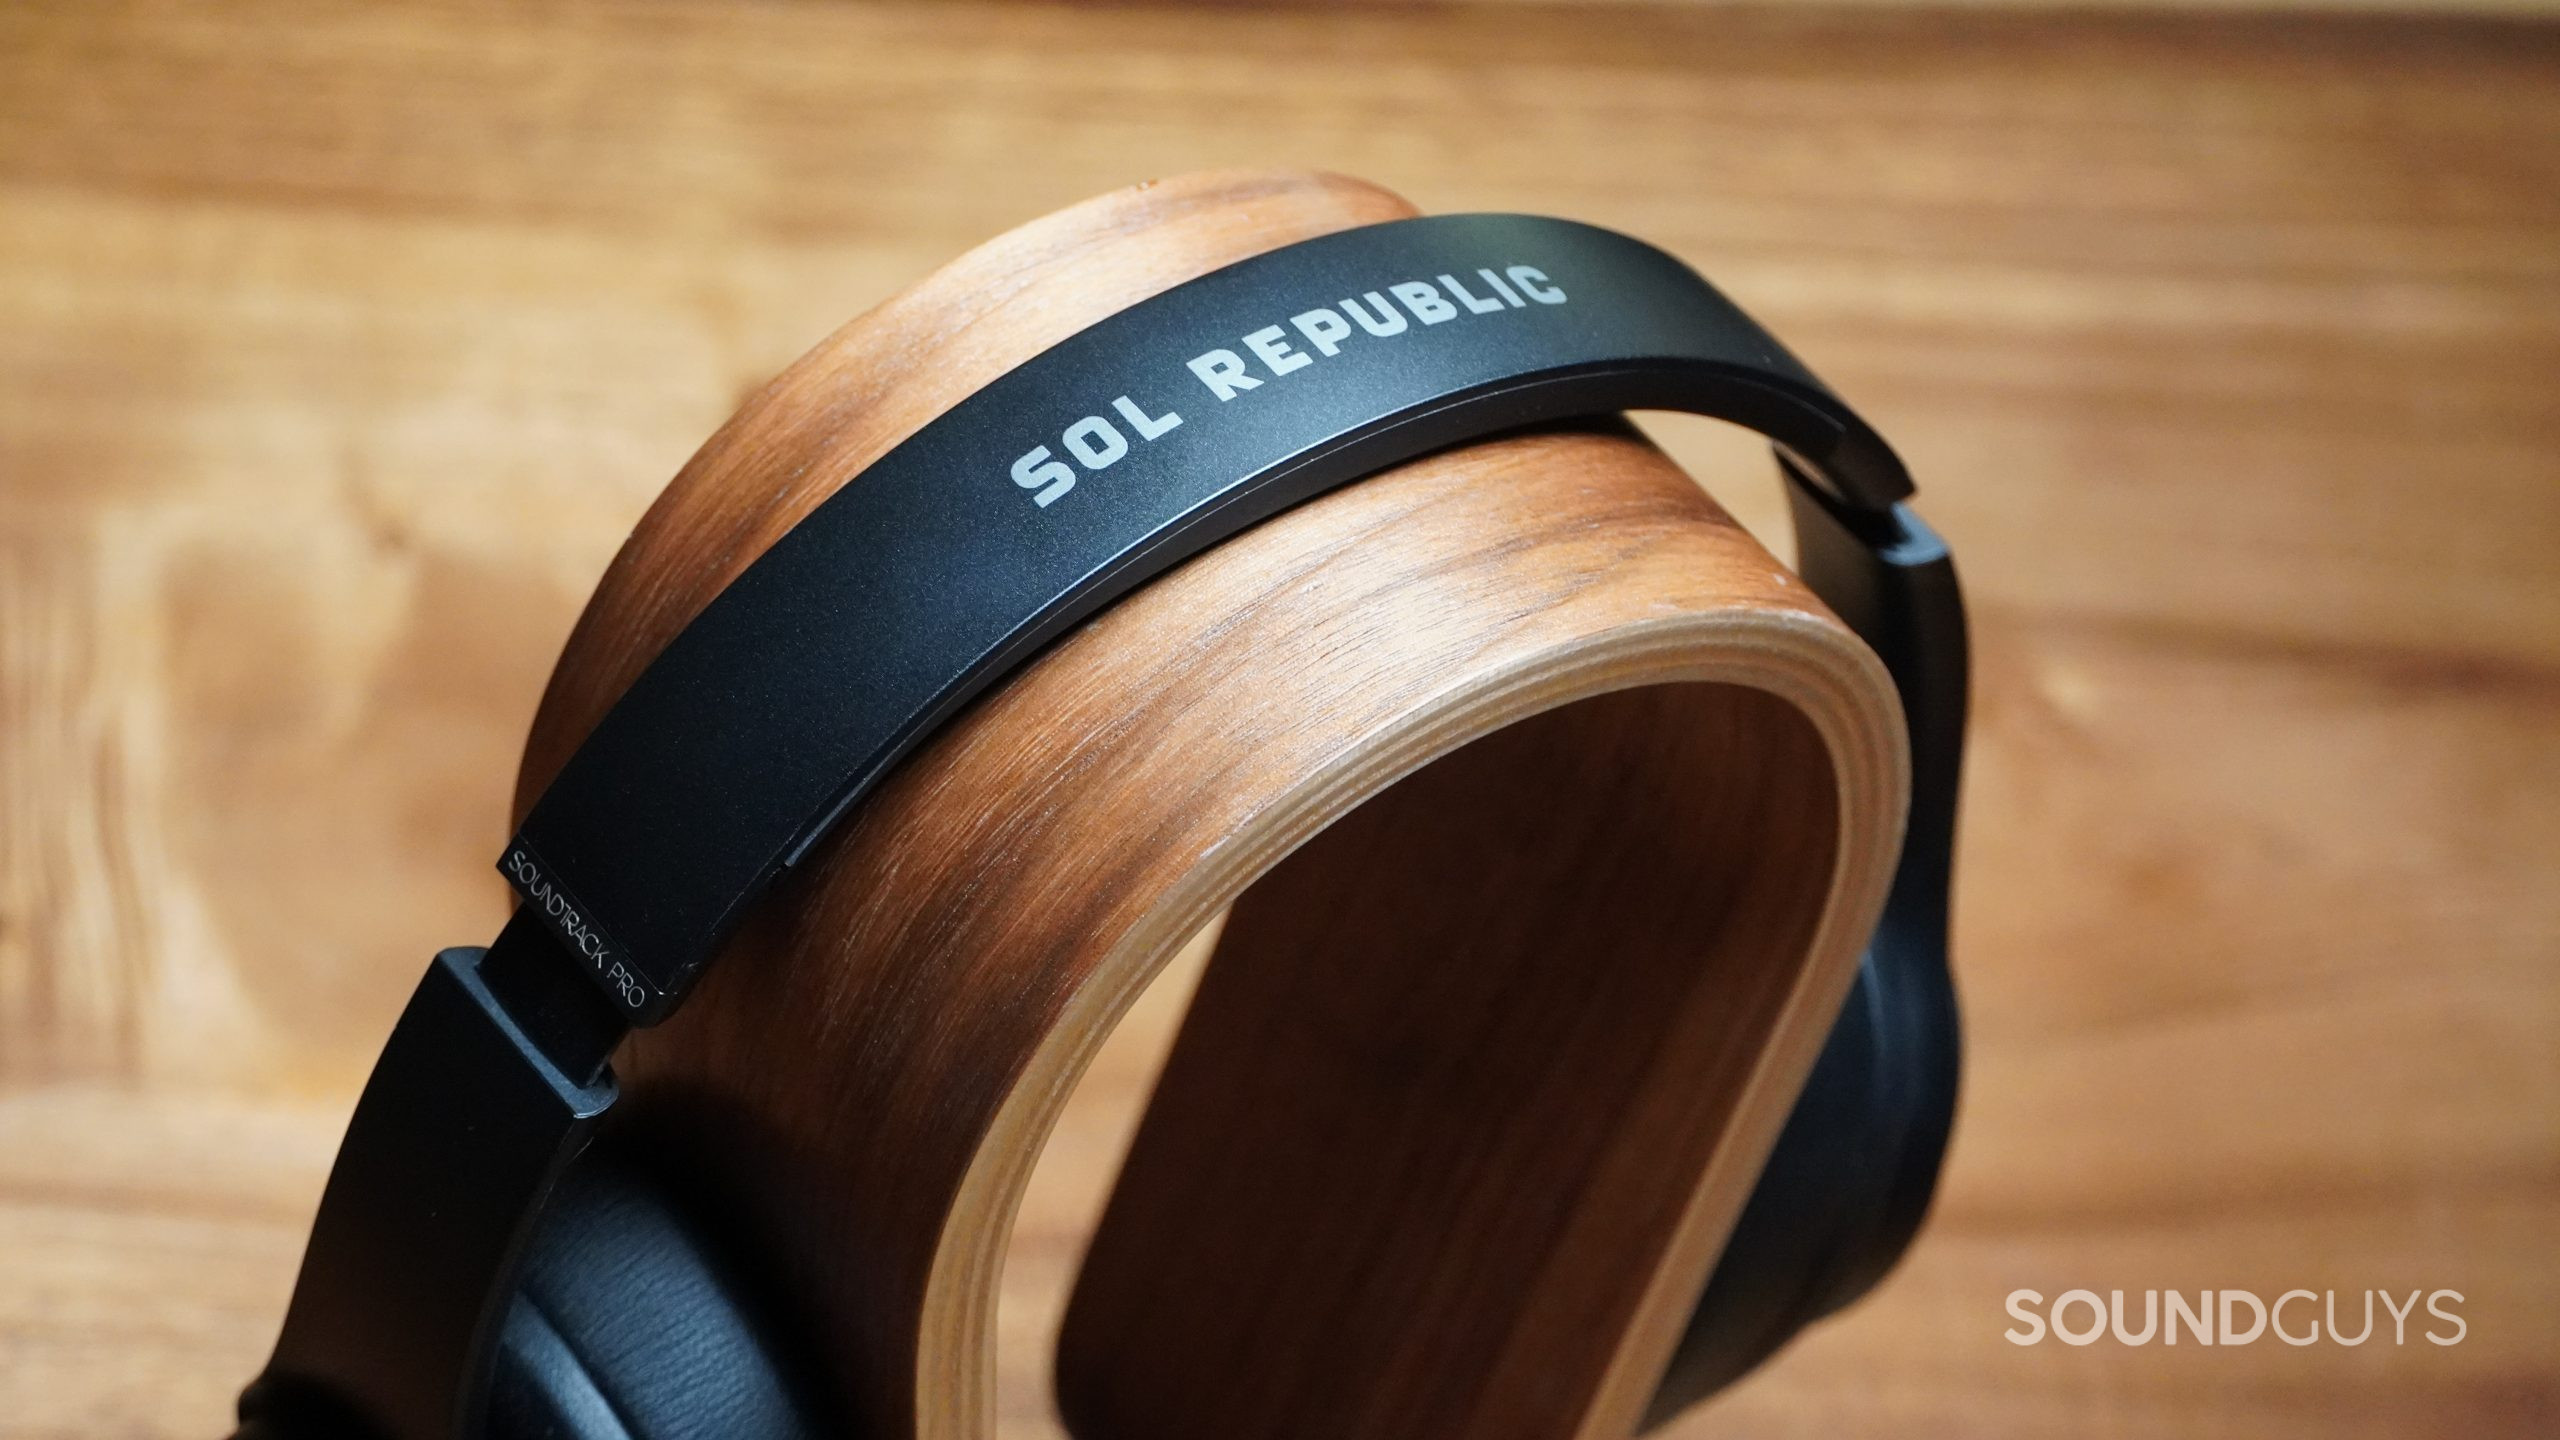 Sol Republic Soundtrack Pro headphone band showing the logo text.